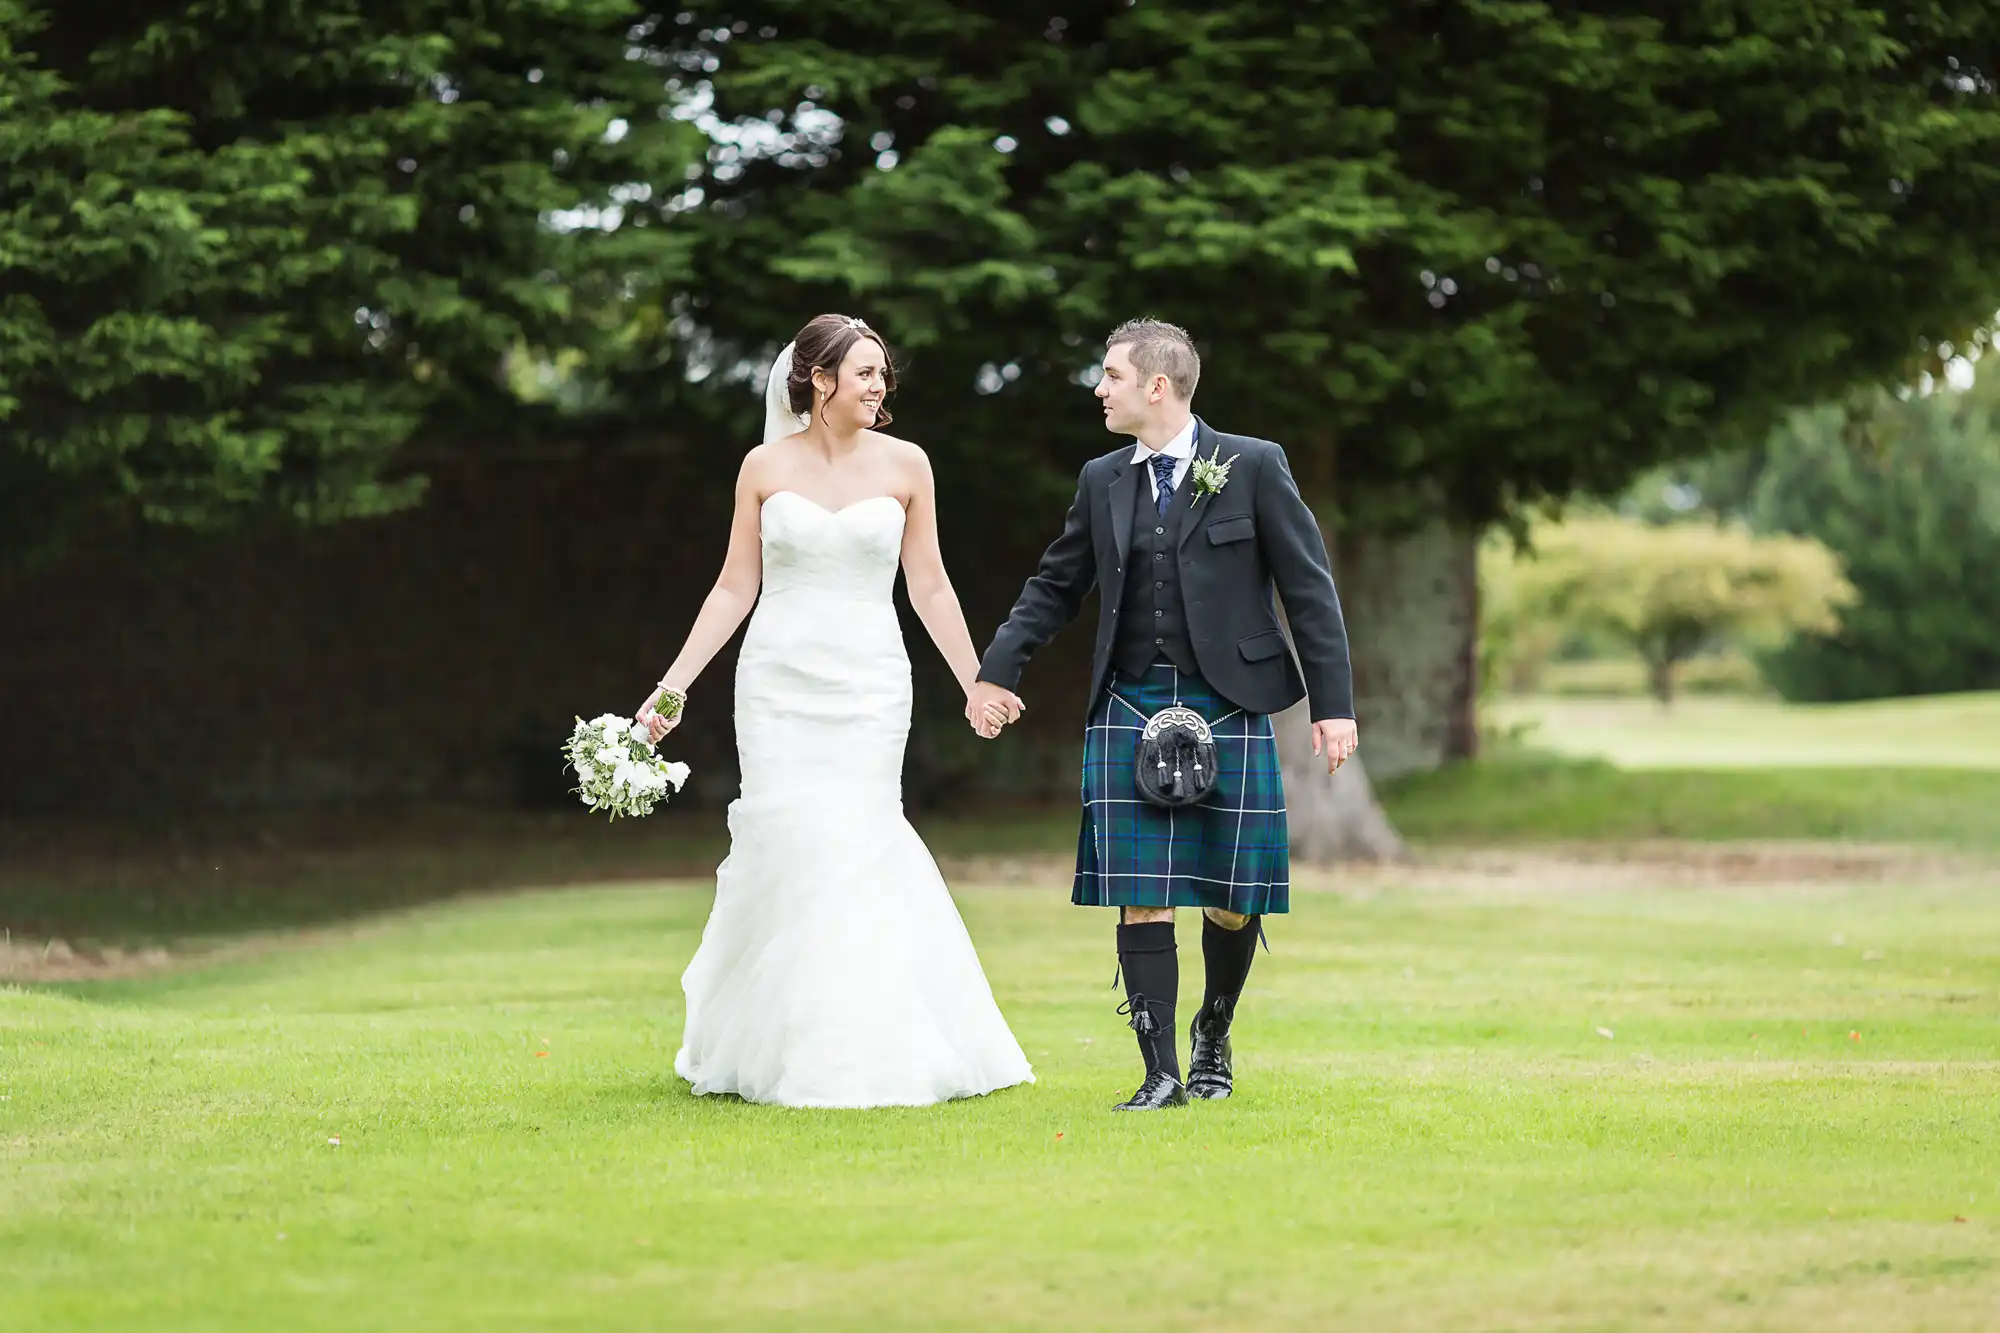 Royal Musselburgh Golf Course wedding - Gillian and Dougie